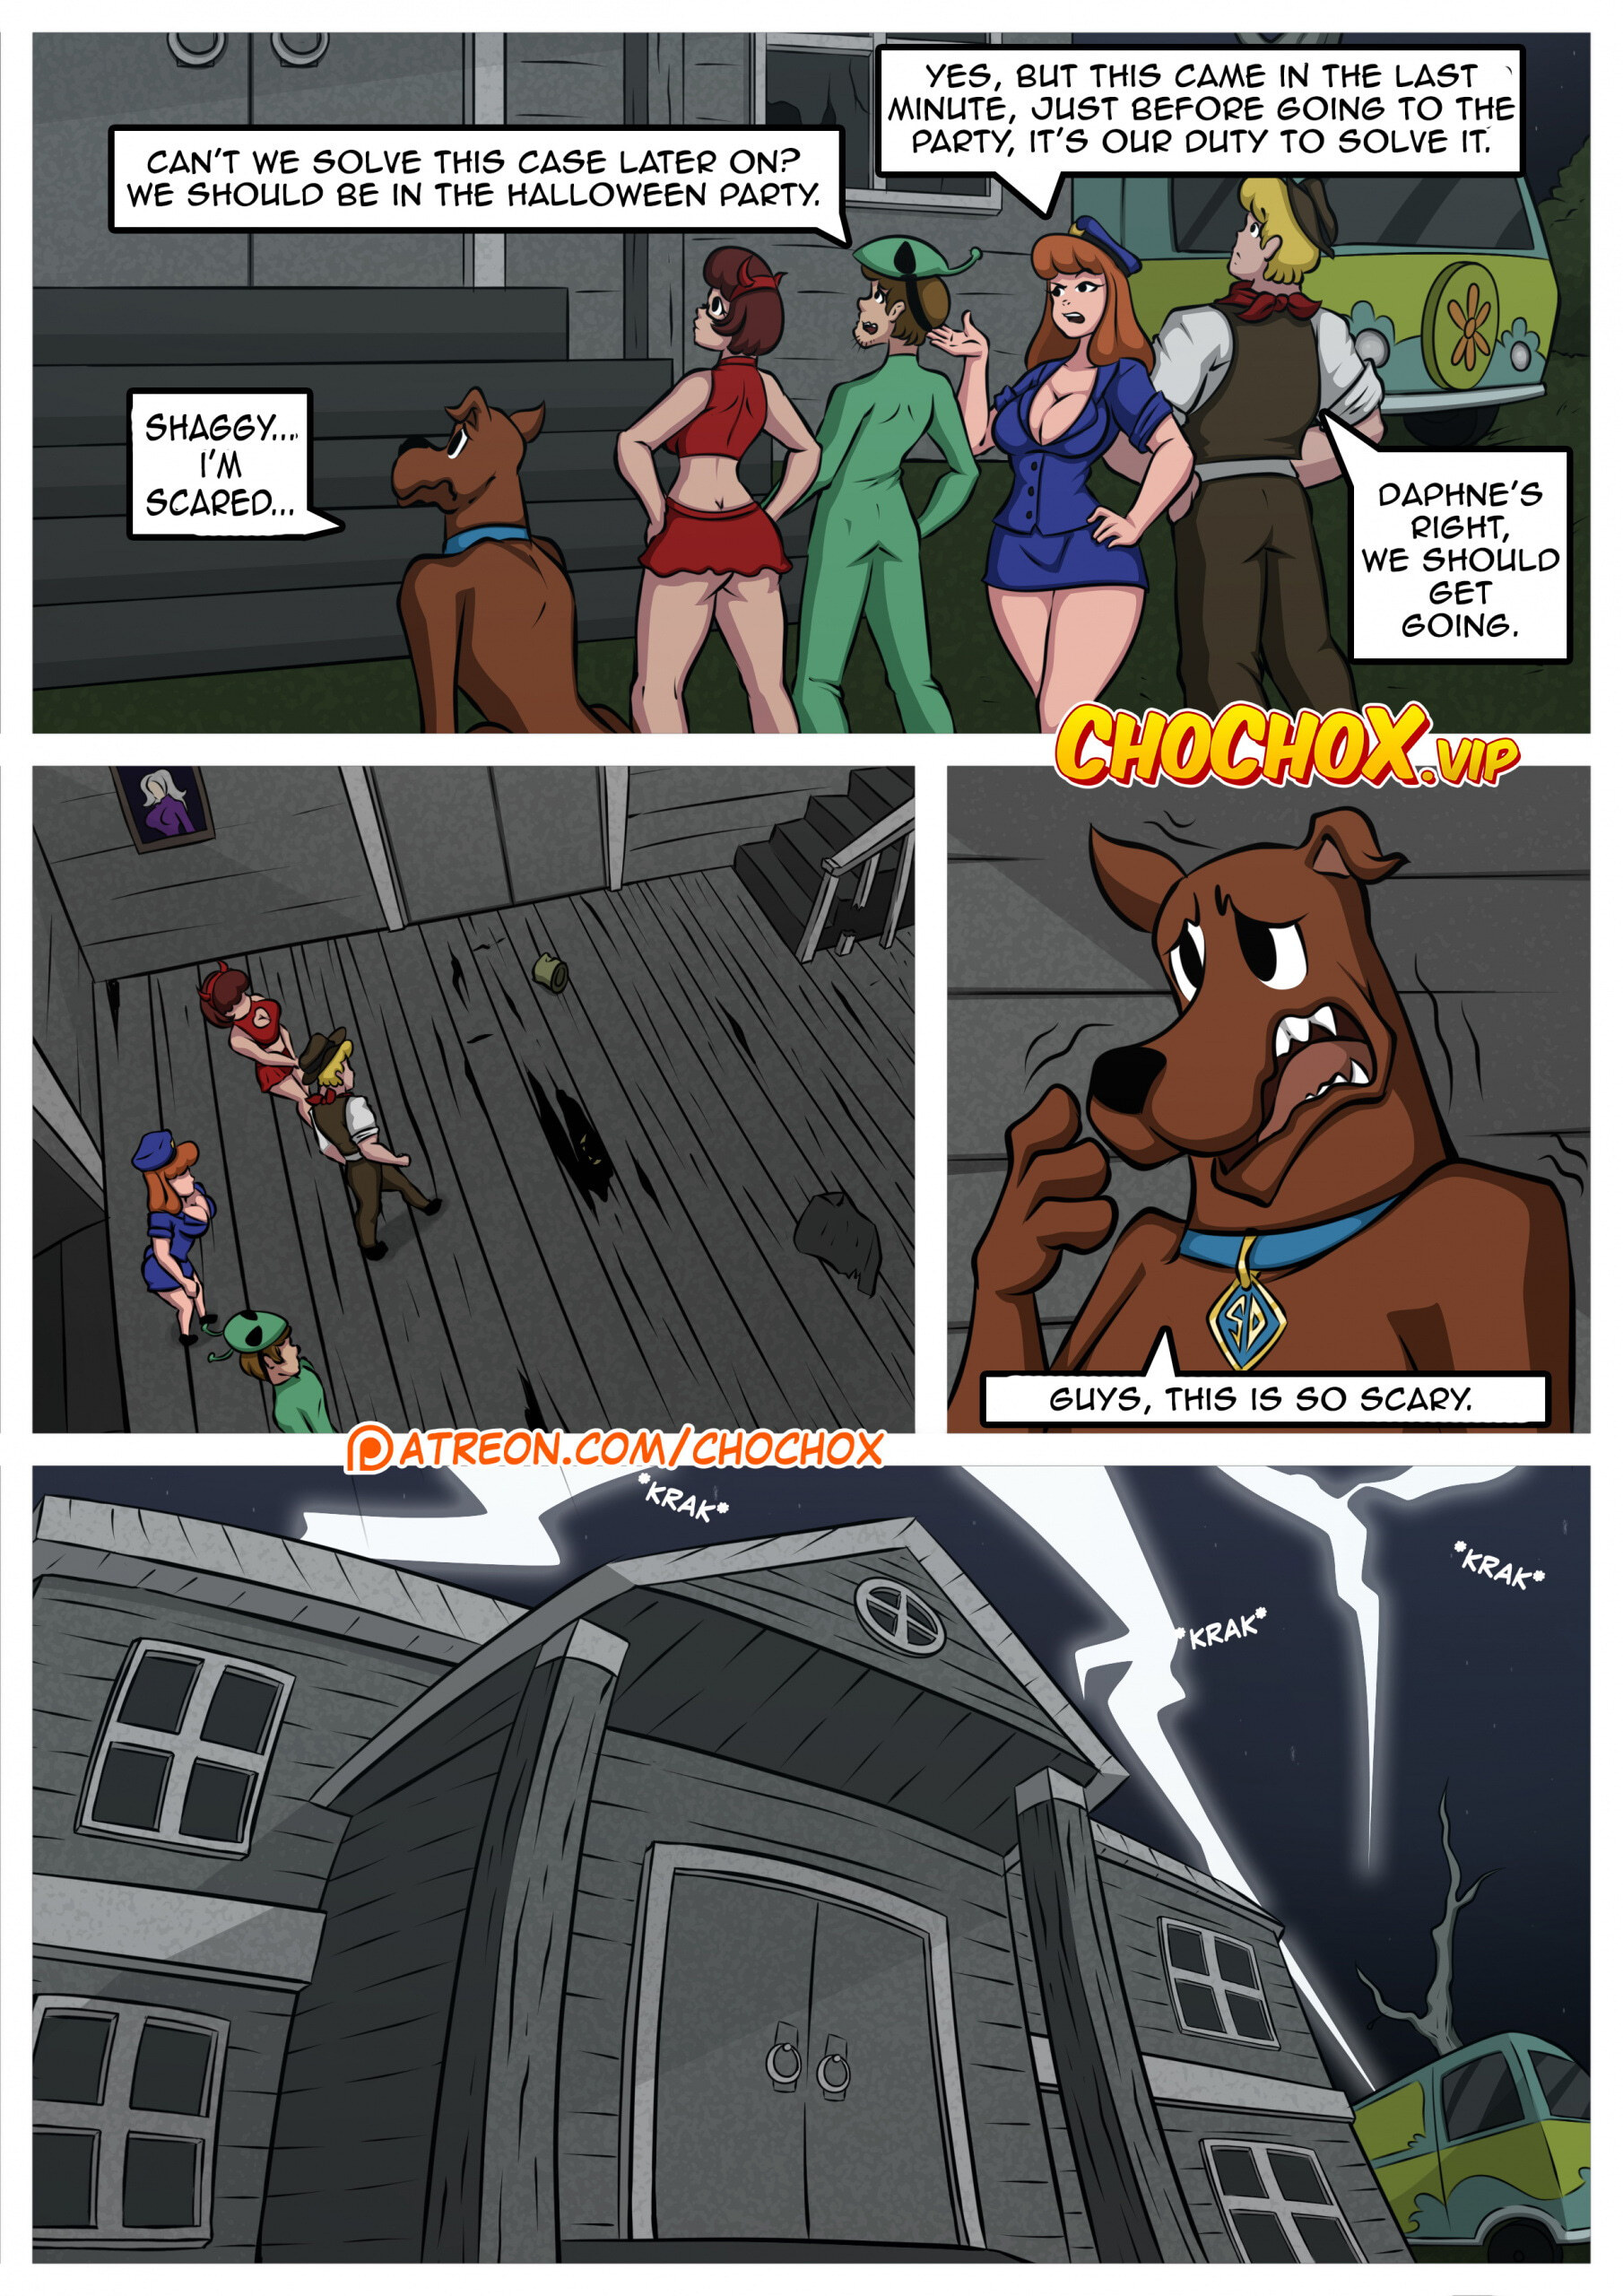 Scooby Doo! - The Halloween Night - Page 2